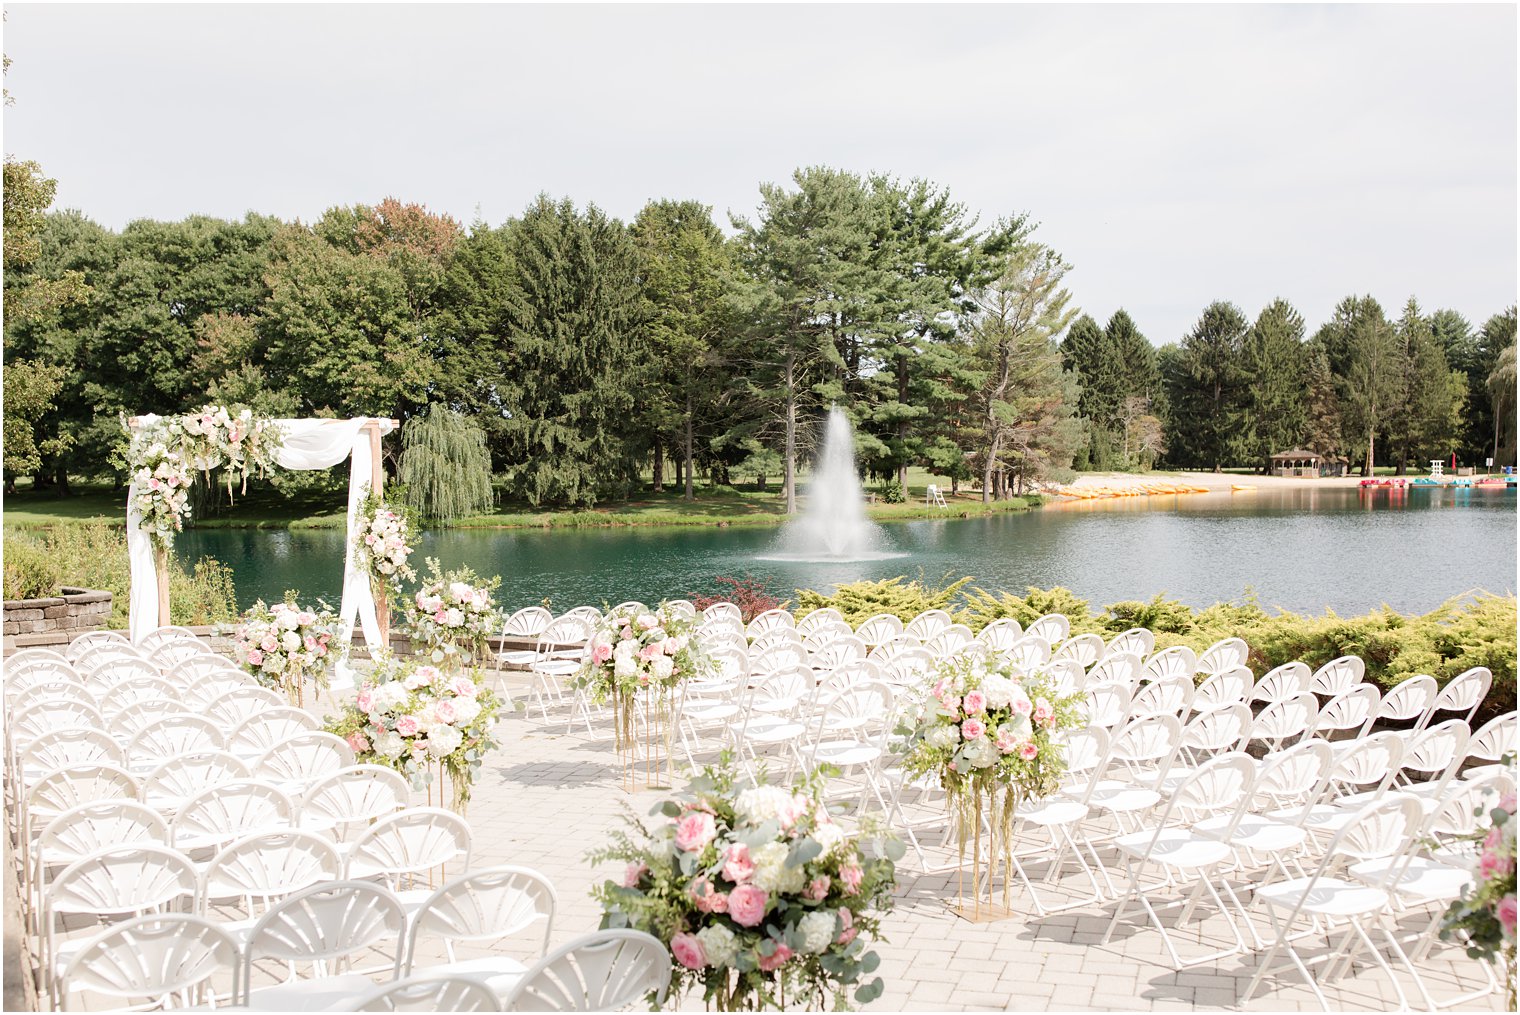 Outdoor ceremony at Windows on the Water at Frogbridge in Millstone, NJ